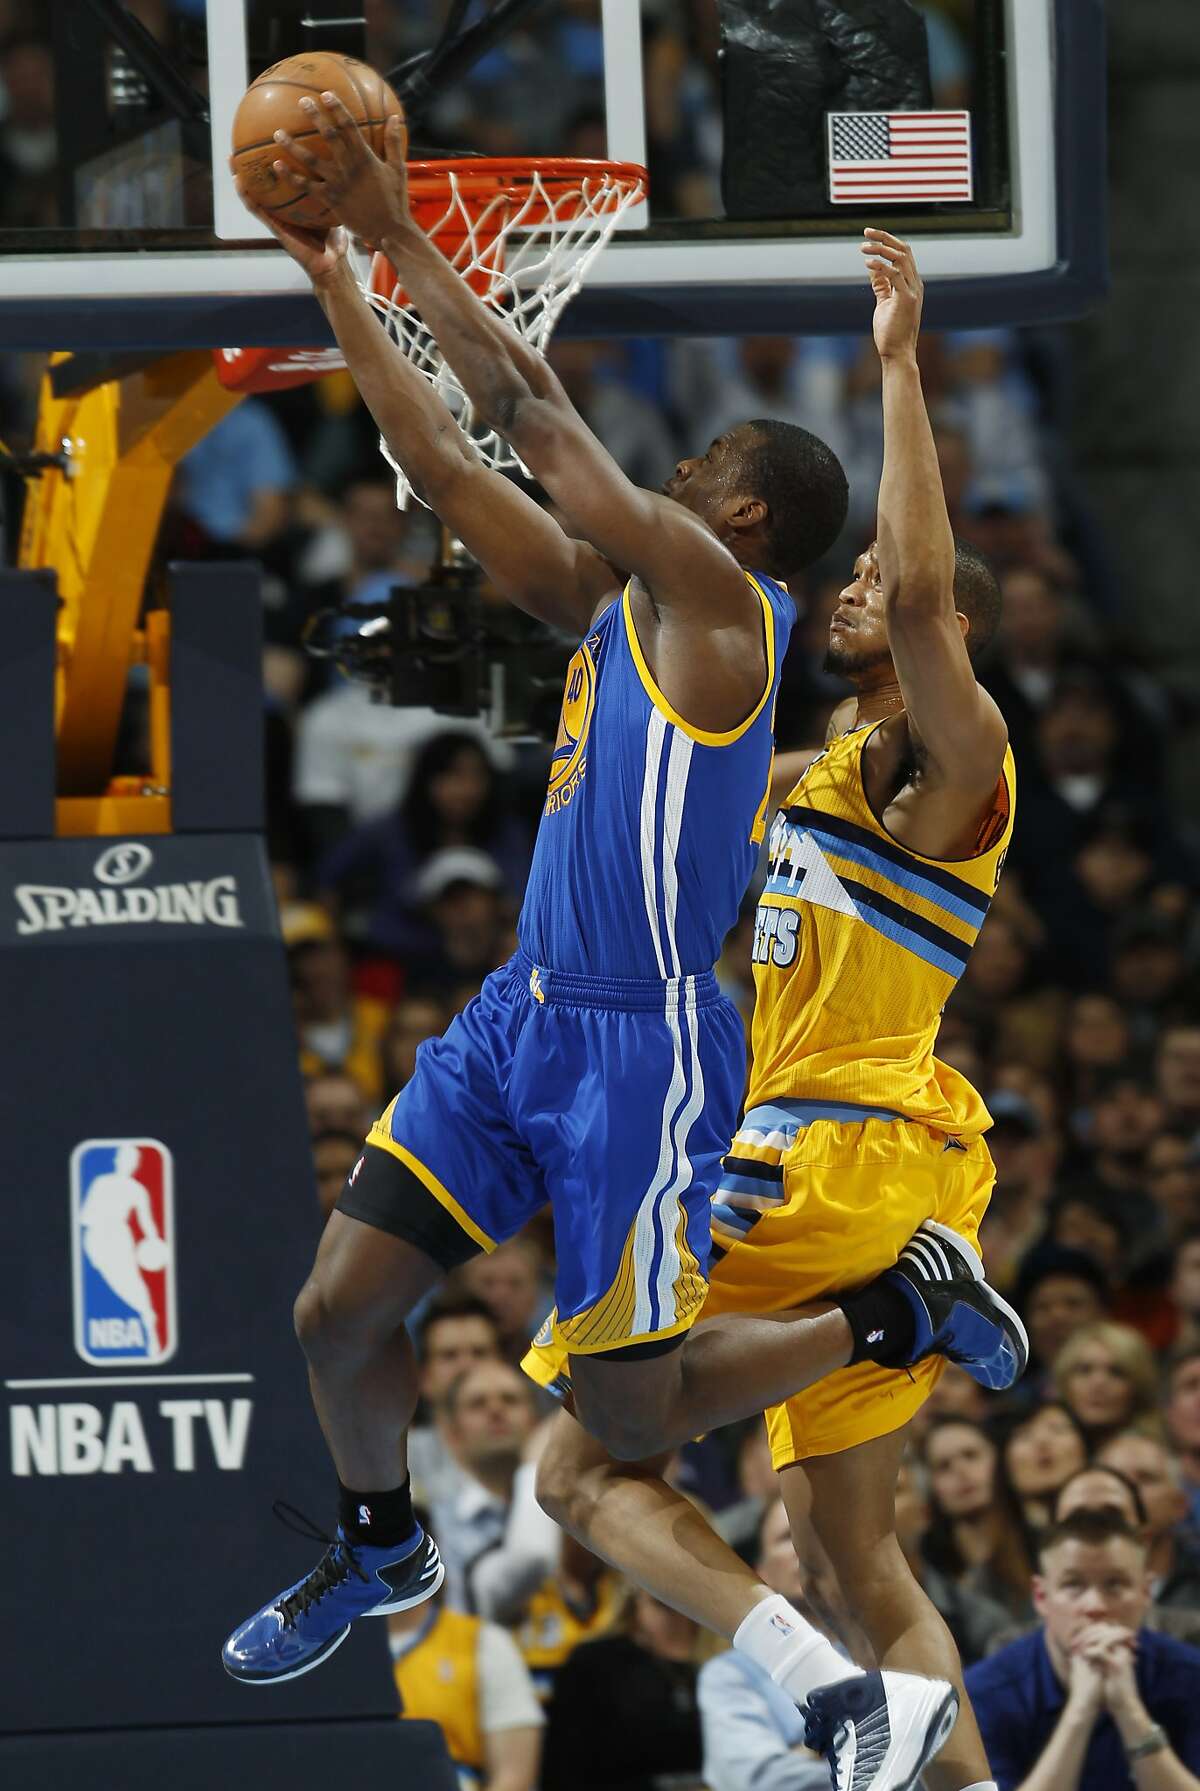 Golden State Warriors forward Harrison Barnes, front, goes up for a reverse dunk past Denver Nuggets forward Anthony Randolph in the fourth quarter of the Warriors' 131-117 victory in Game 2 of the teams' NBA first-round playoff series in Denver on Tuesday, April 23, 2013. (AP Photo/David Zalubowski)